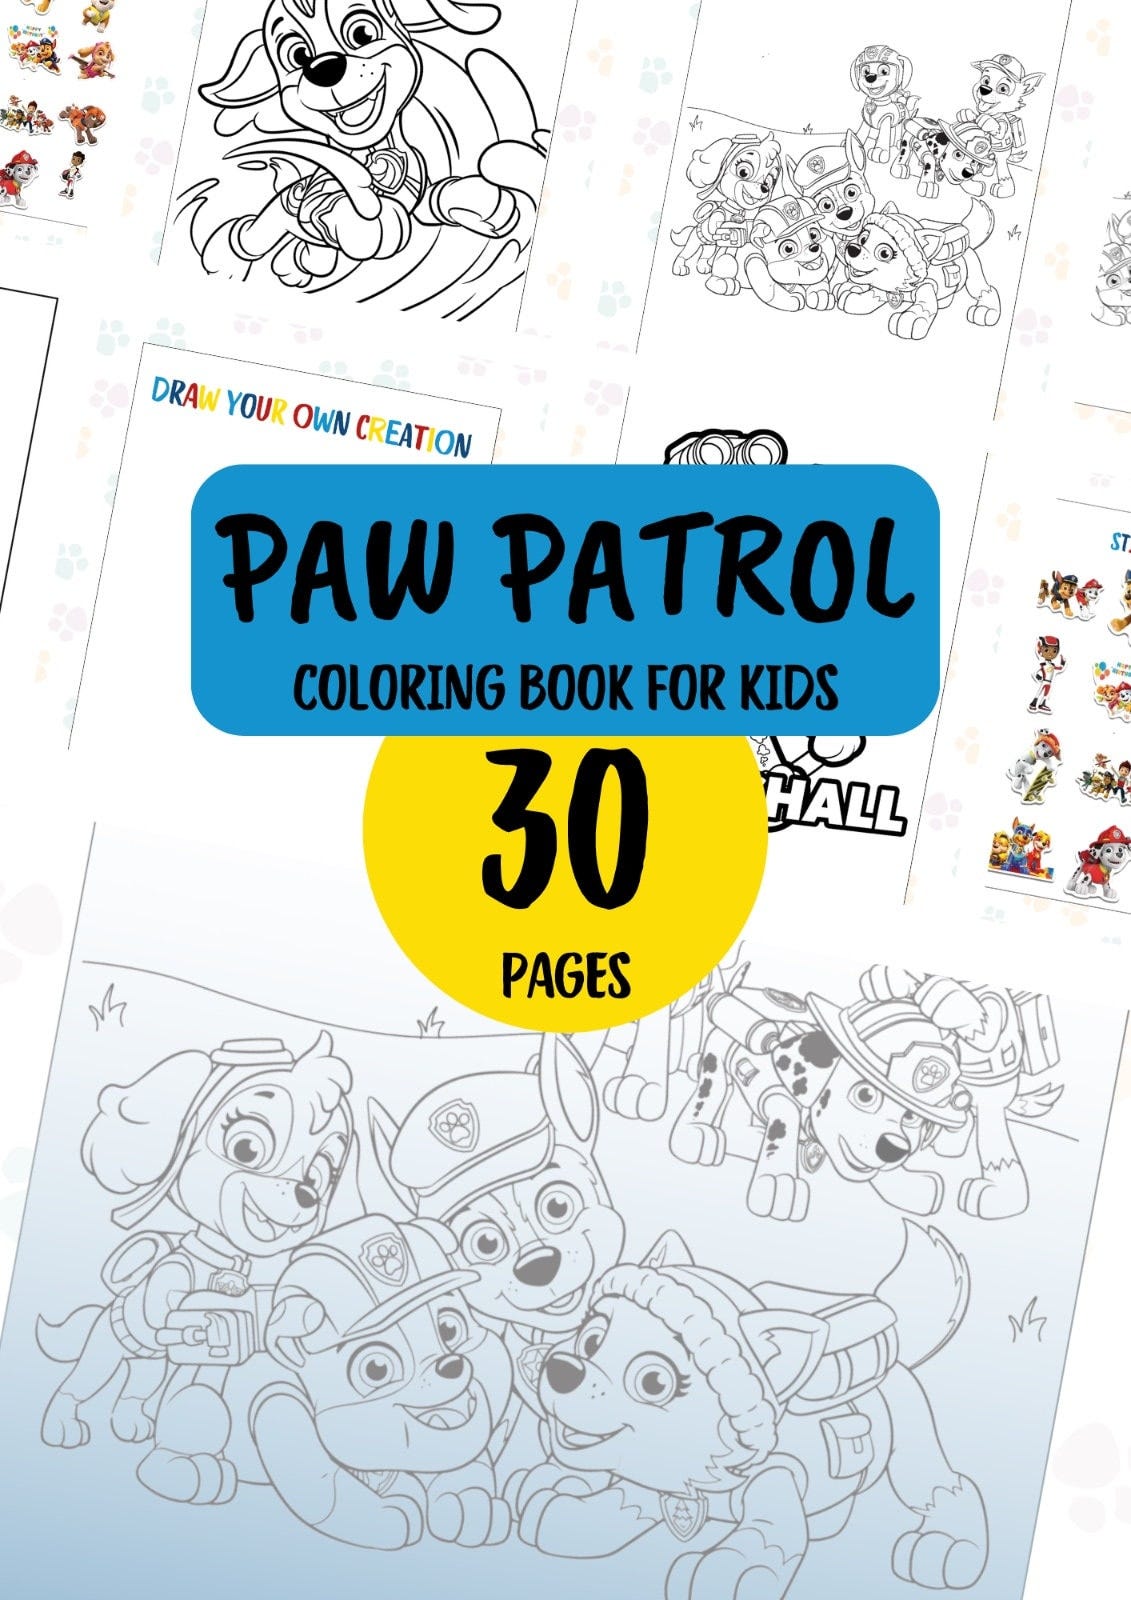 Paw Patrol: Coloring Book for Kids - 30+ Pages of Adventure and Coloring Fun!